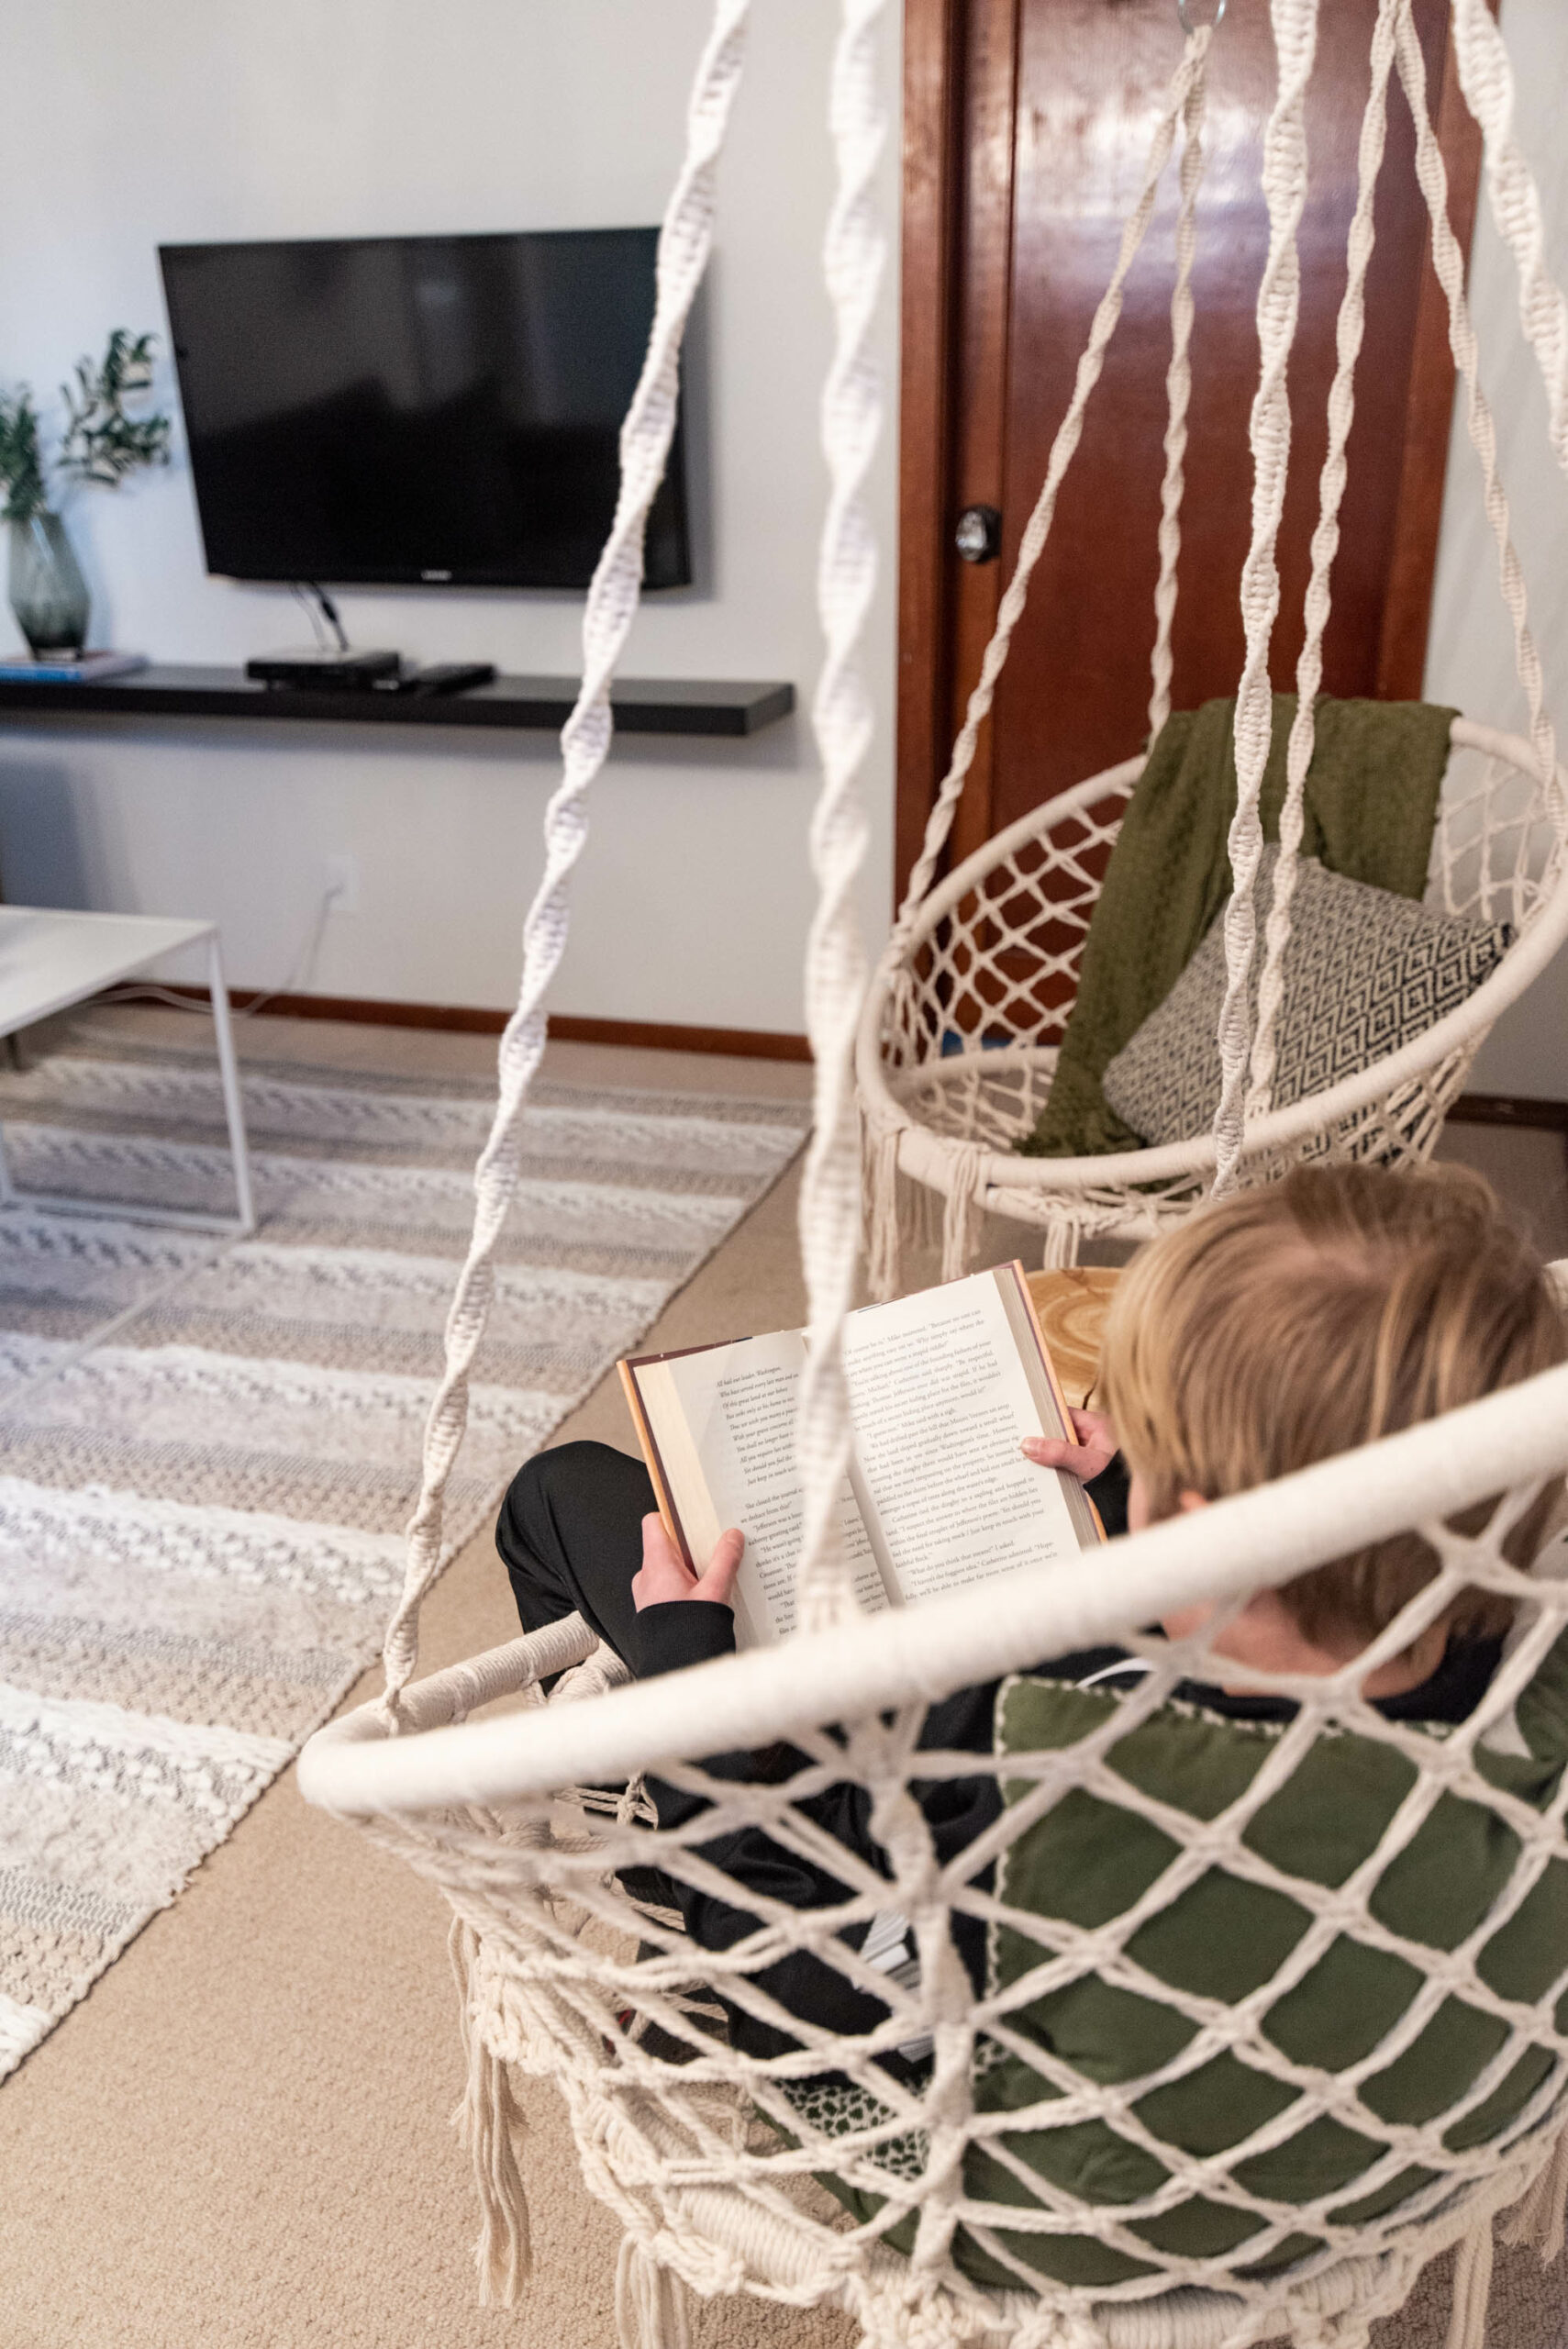 Cozy reading spot in an airbnb- macrame hanging chairs